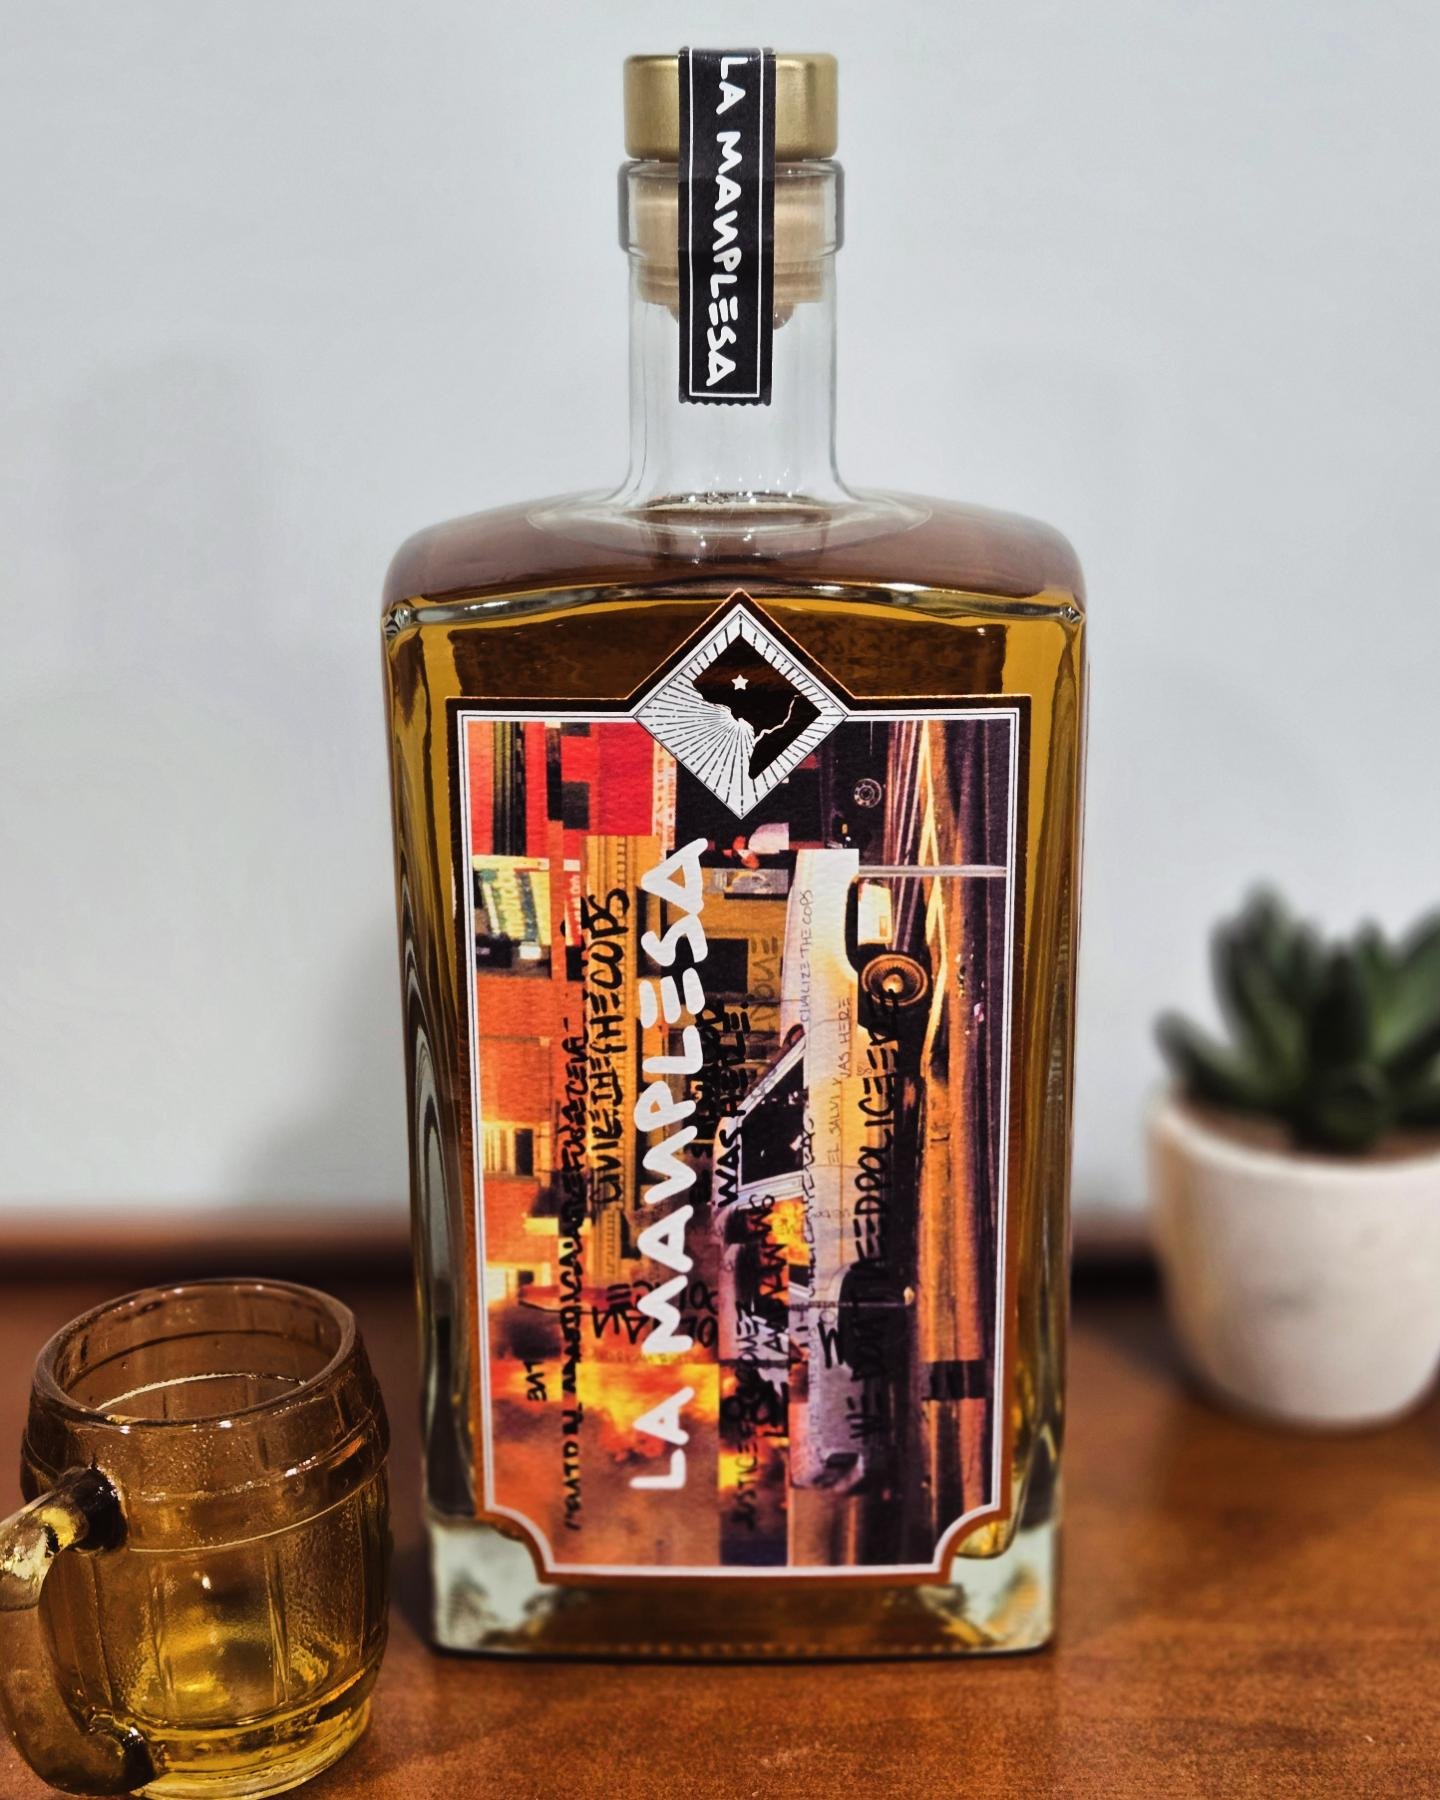 La Manplesa&mdash;Mt. Pleasant Club Whiskey's first step into the world of agave spirits&mdash;is now available at Irving Wine and Spirits! 

Aged 16 months in Mt. P bourbon barrels, La Manplesa is available in a cask-strength single-barrel selection